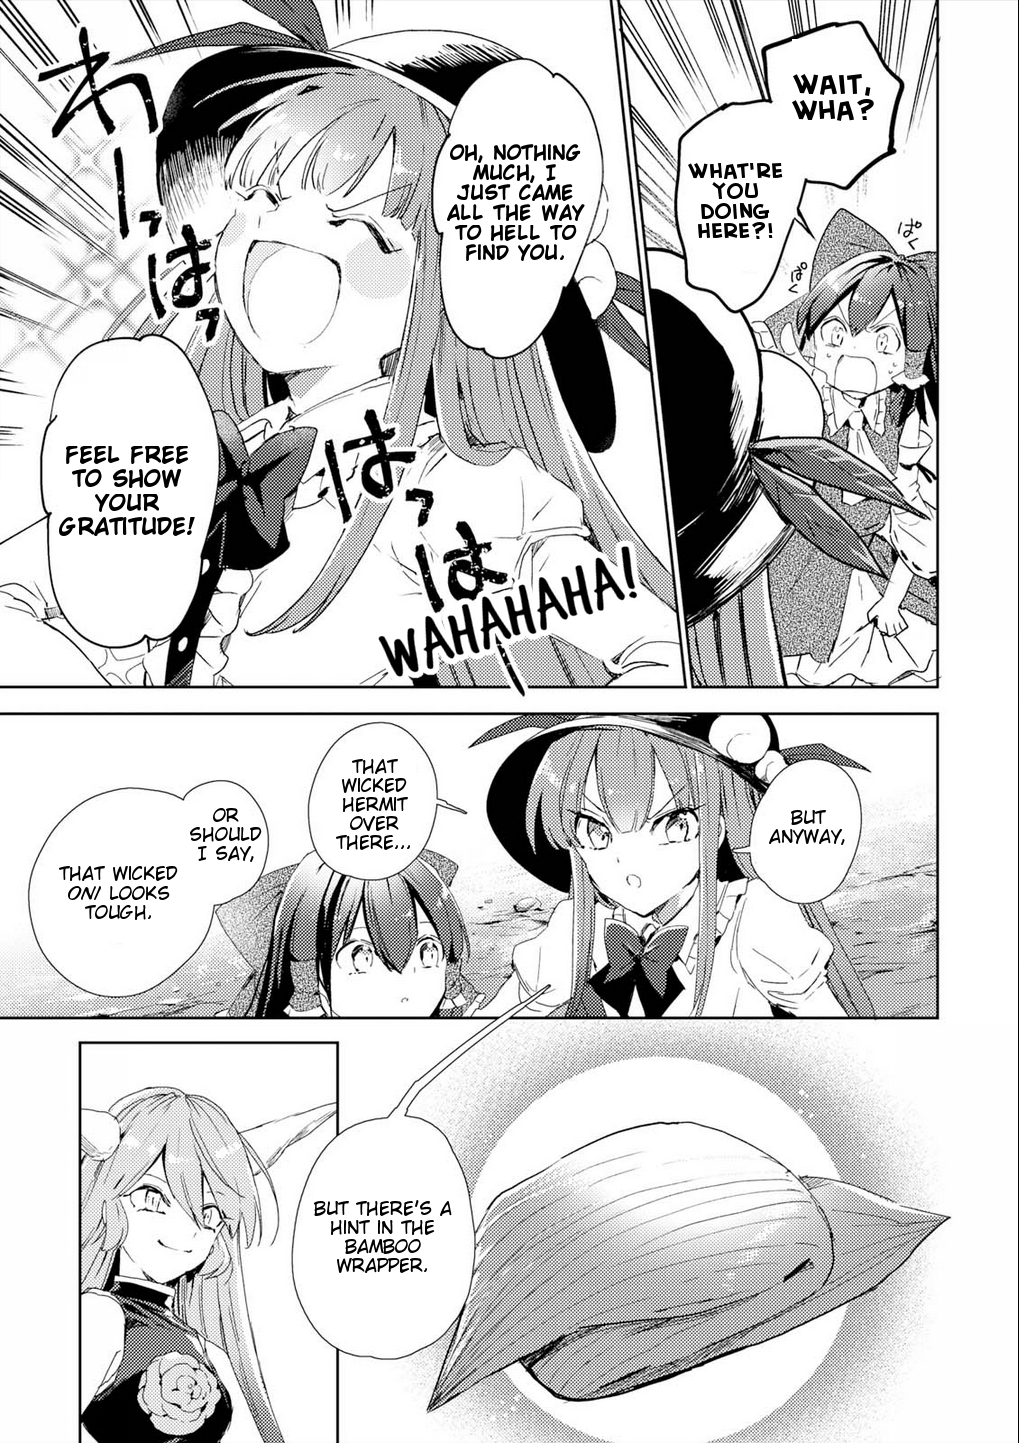 Touhou Ibarakasen - Wild and Horned Hermit Vol.10 Chapter 50: The Horned, One-Armed Hermit